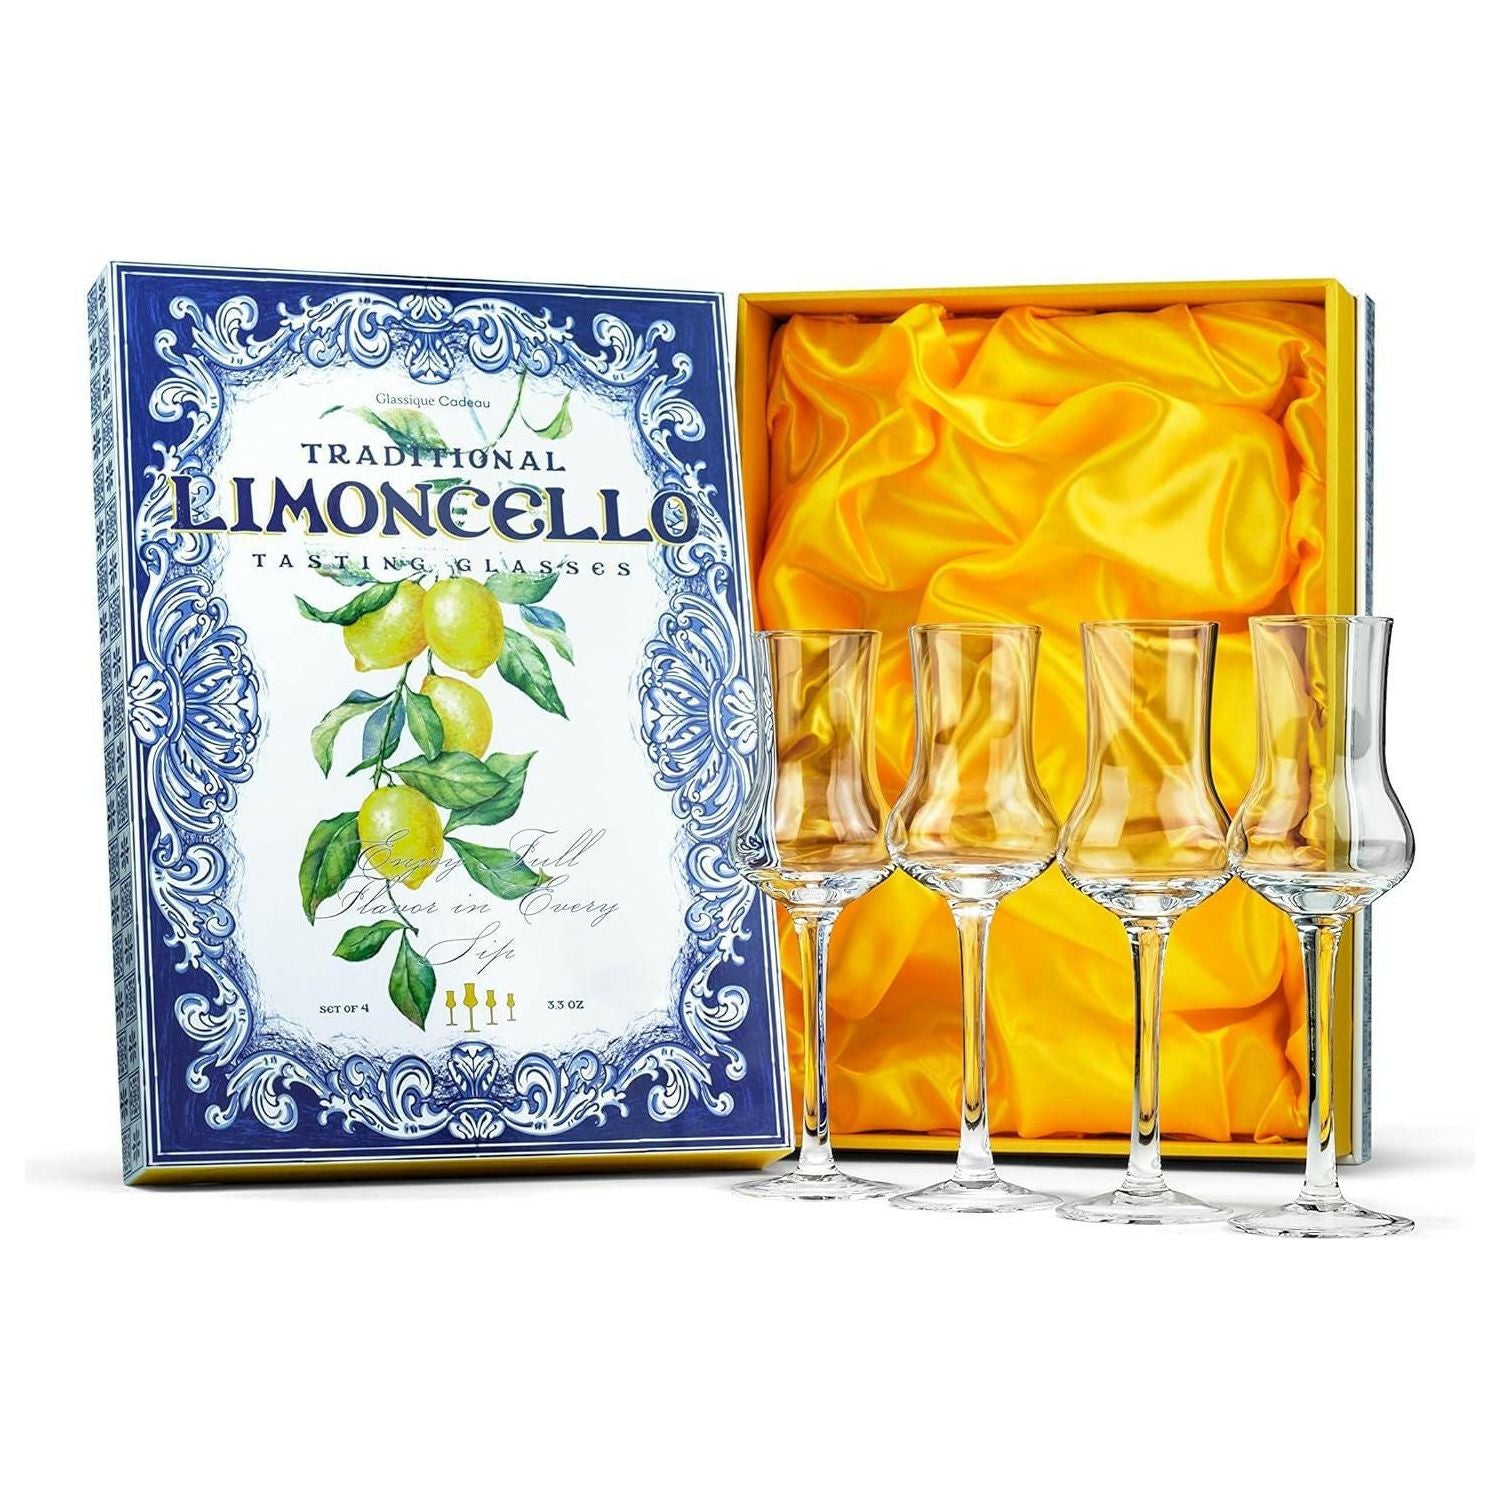 Crystal Limoncello Cordial Glasses - The European Gift Store